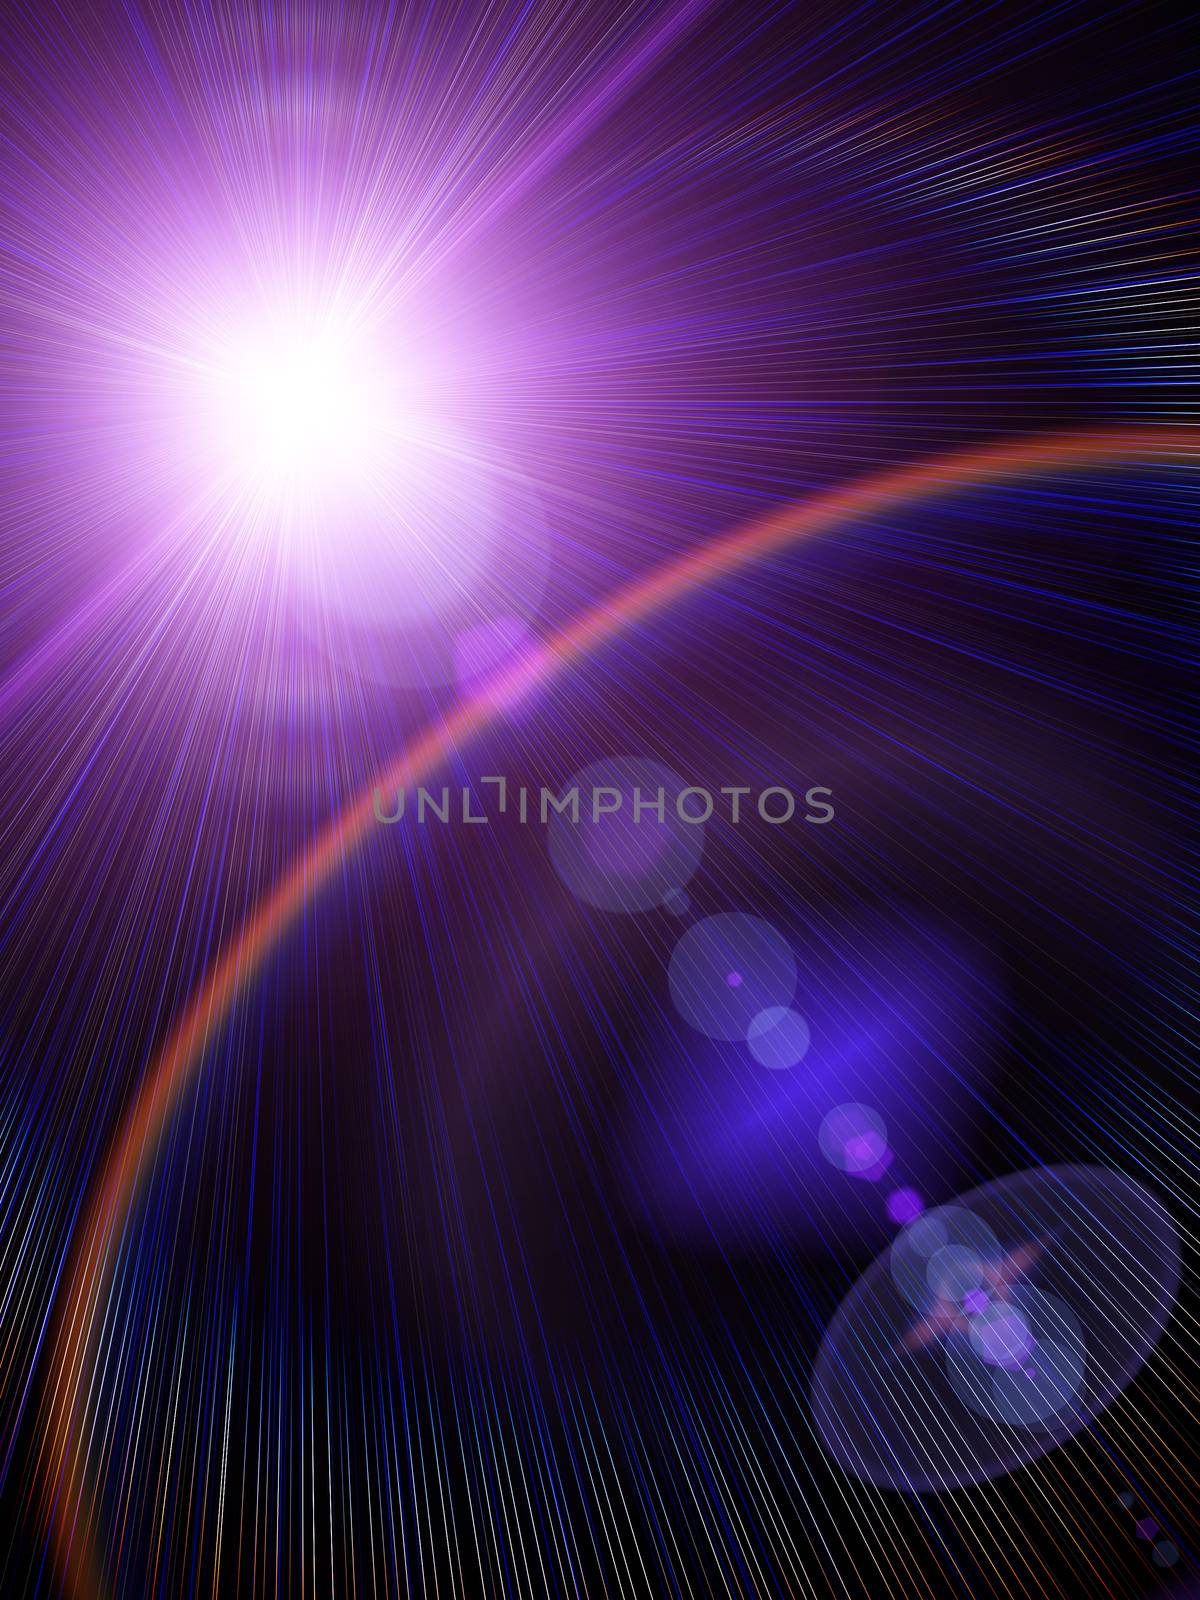 Light lens flare effect with abstract forms overlay on dark background.